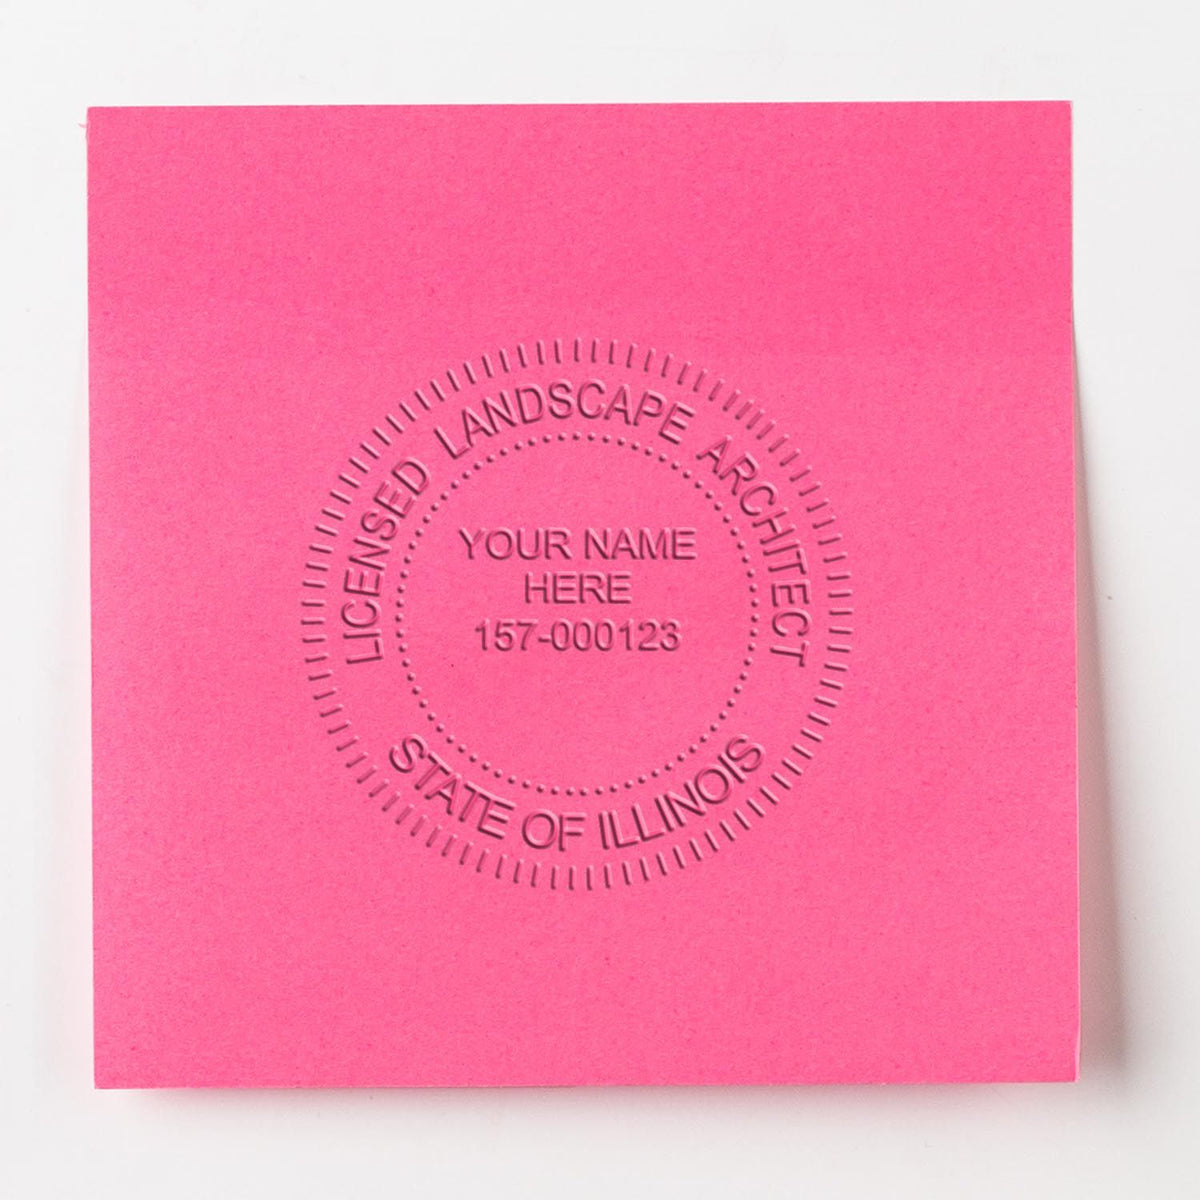 An alternative view of the Hybrid Illinois Landscape Architect Seal stamped on a sheet of paper showing the image in use